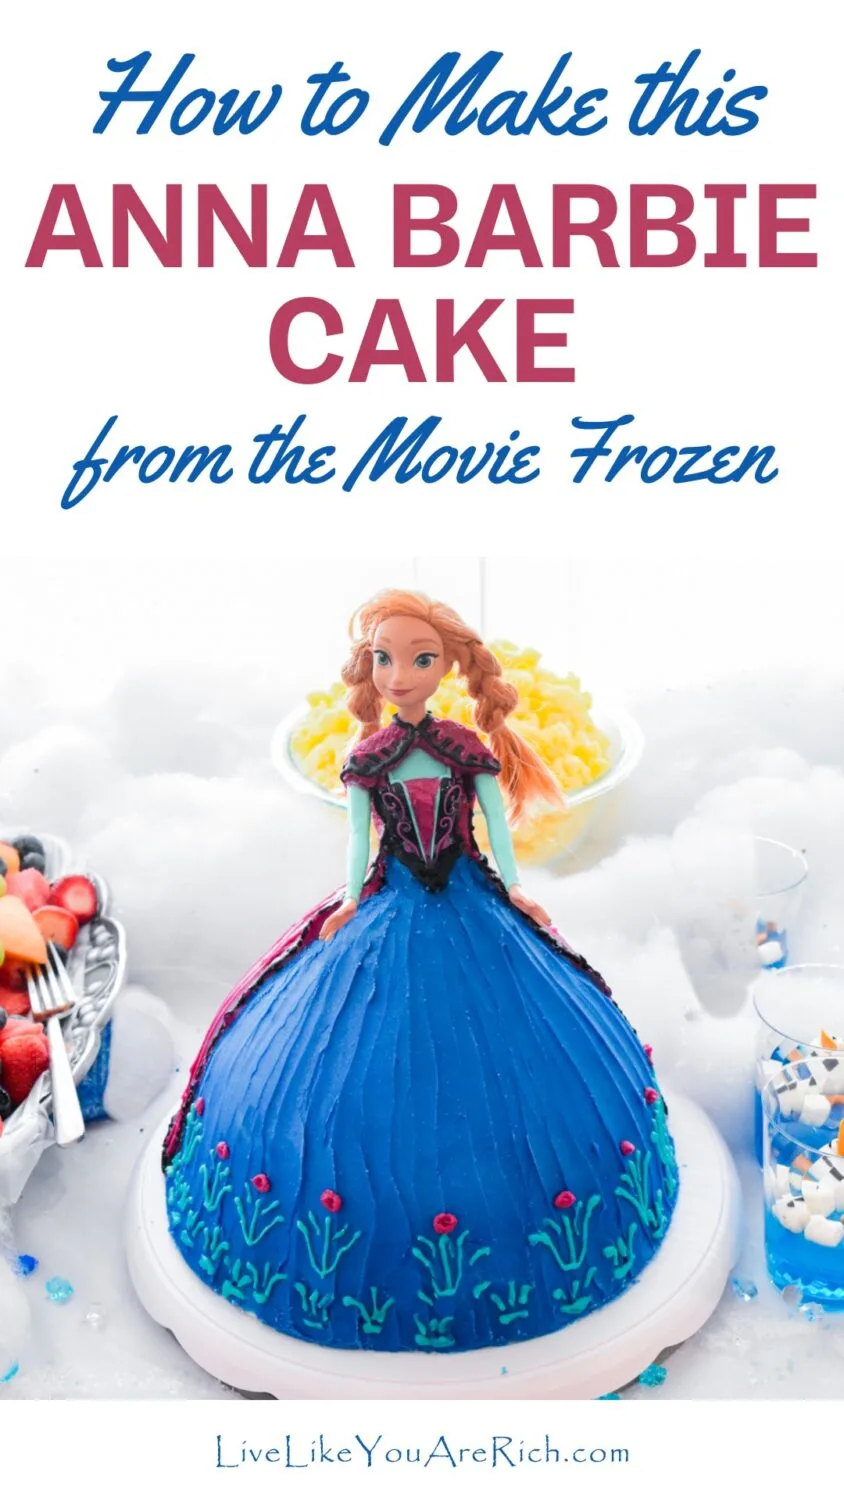 How to Make this Anna Barbie Cake from the Movie Frozen